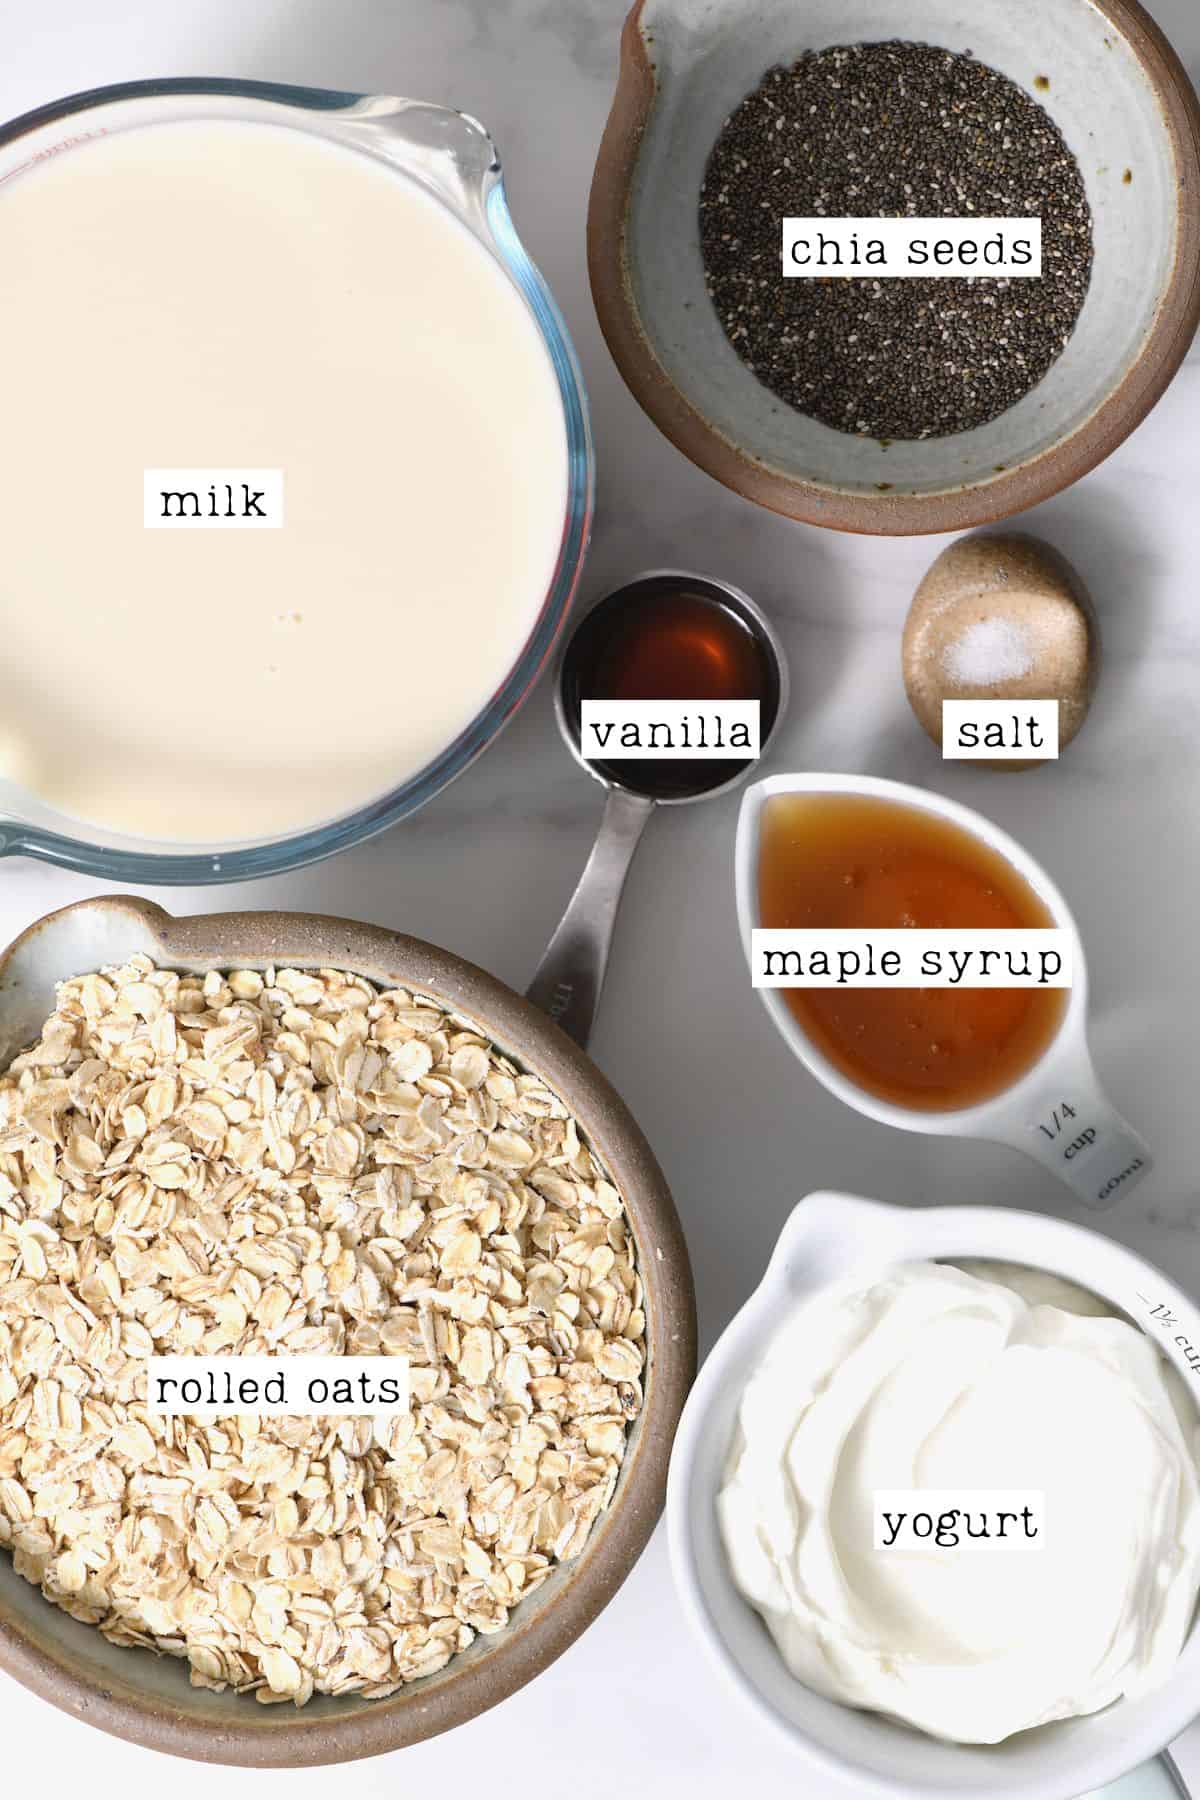 https://www.alphafoodie.com/wp-content/uploads/2022/06/How-to-Make-Overnight-Oats-Ingredients-for-overnight-oats.jpeg